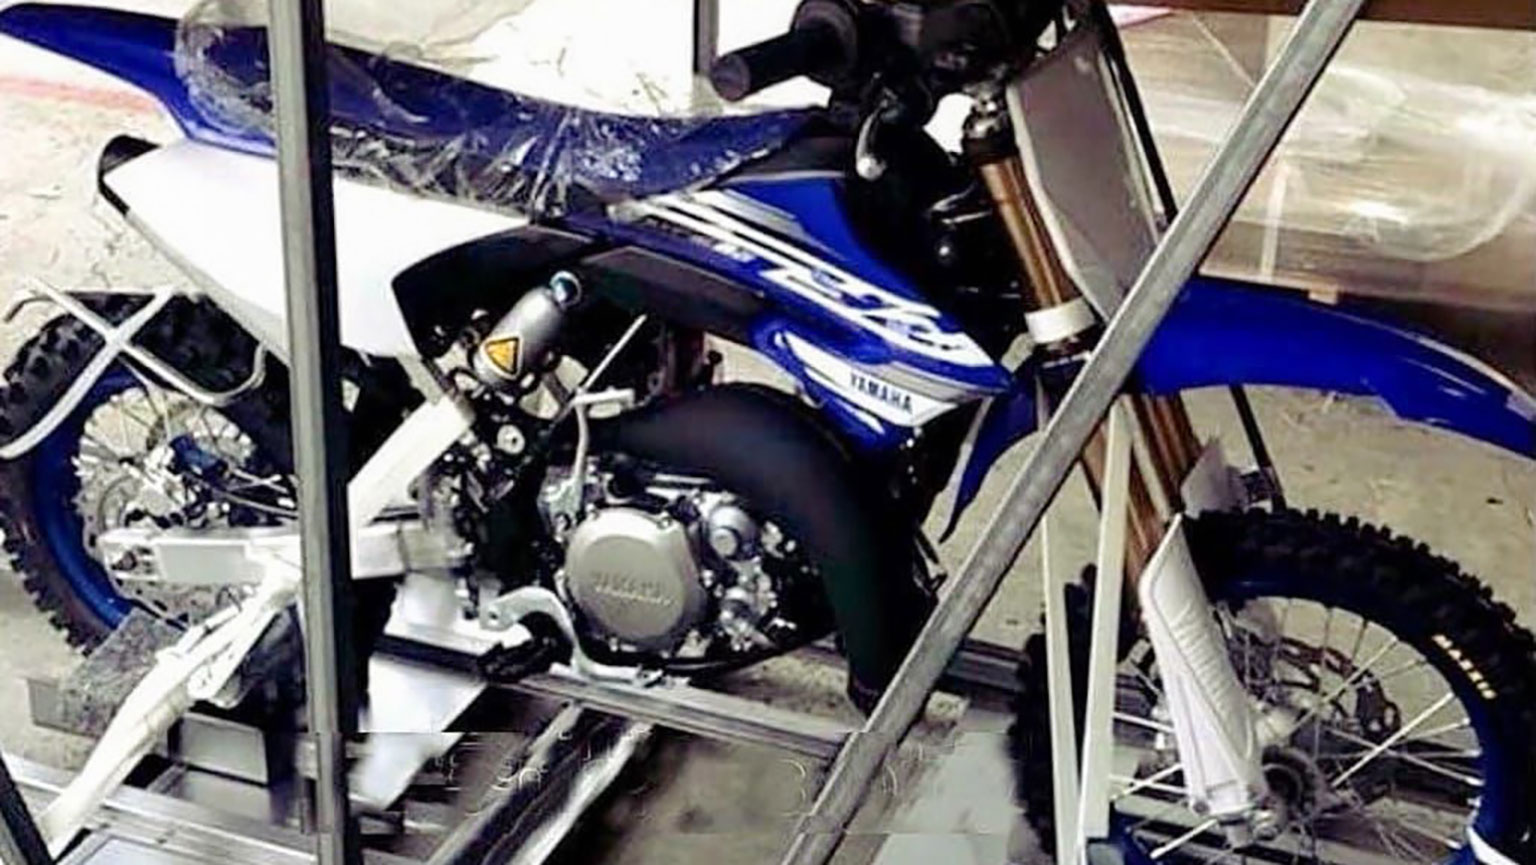 This spy shot of a YZ65 in a crate has been leaked